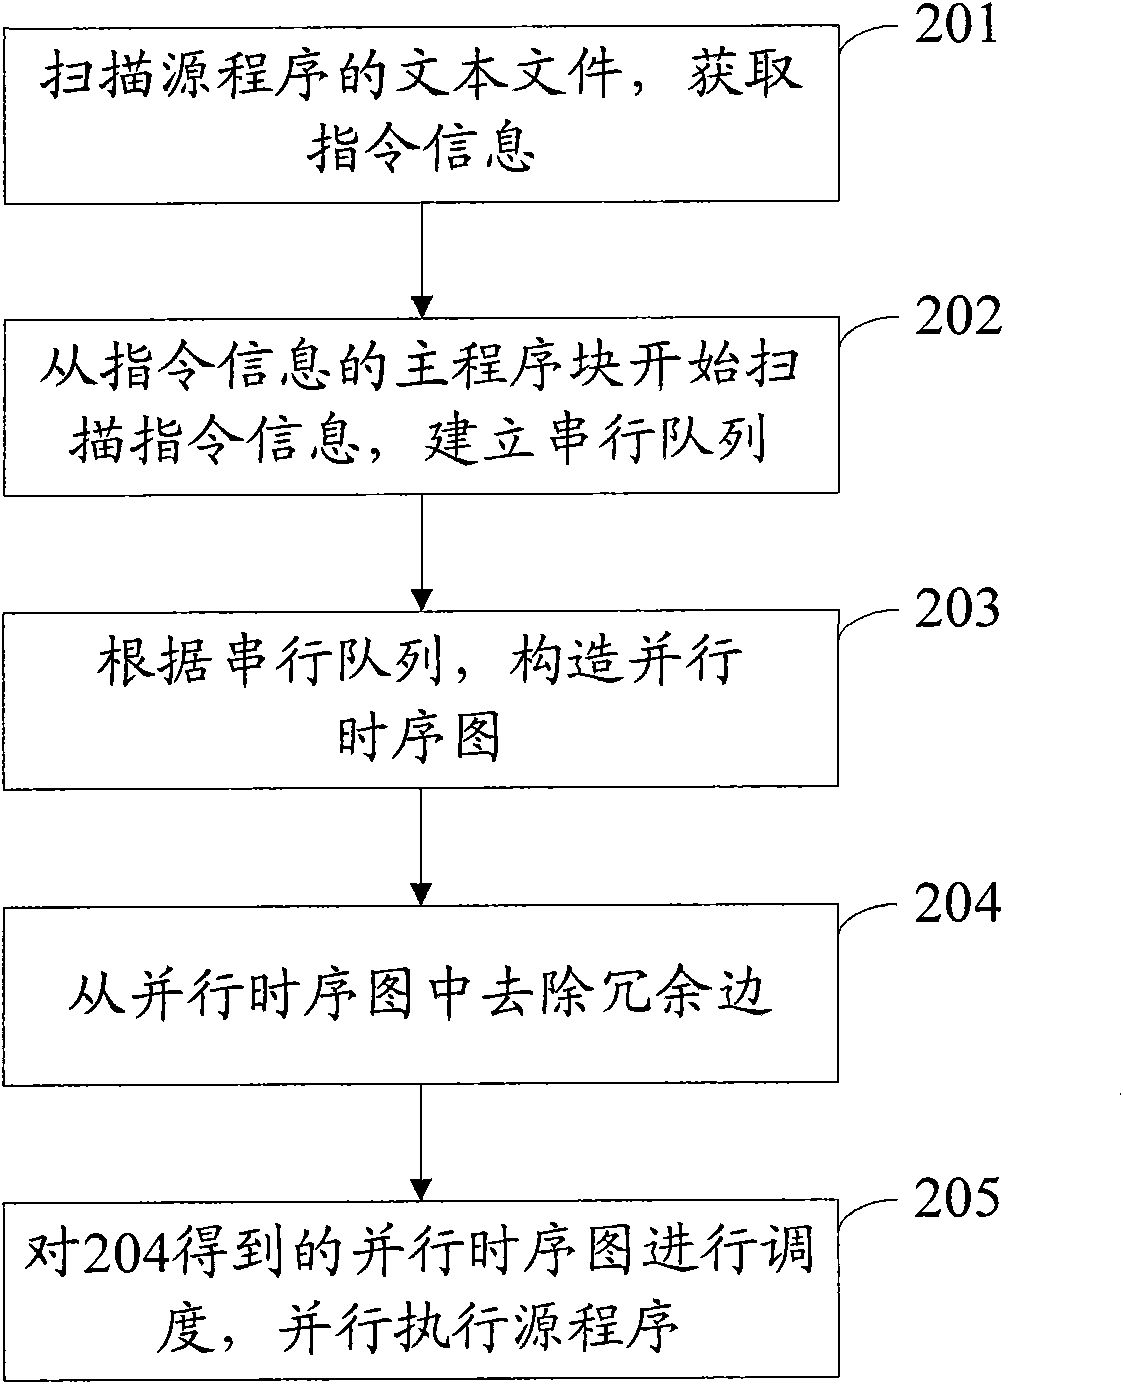 Method for implementing program, method for verifying program result, devices and system